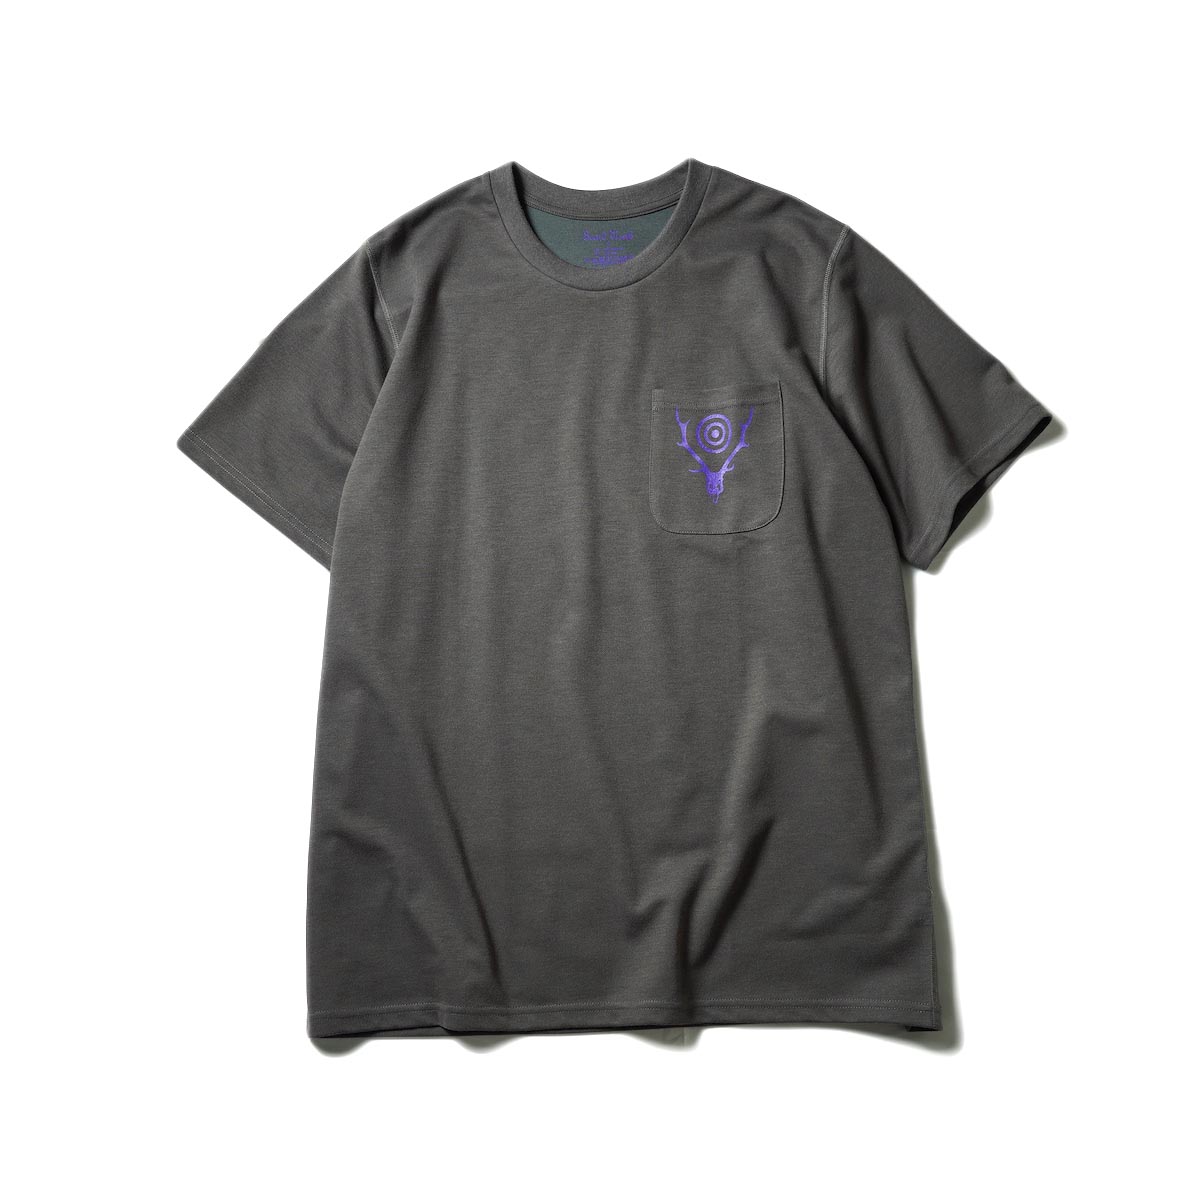 South2 West8 / S/S ROUND POCKET TEE - CIRCLE HORN (Charcoal)